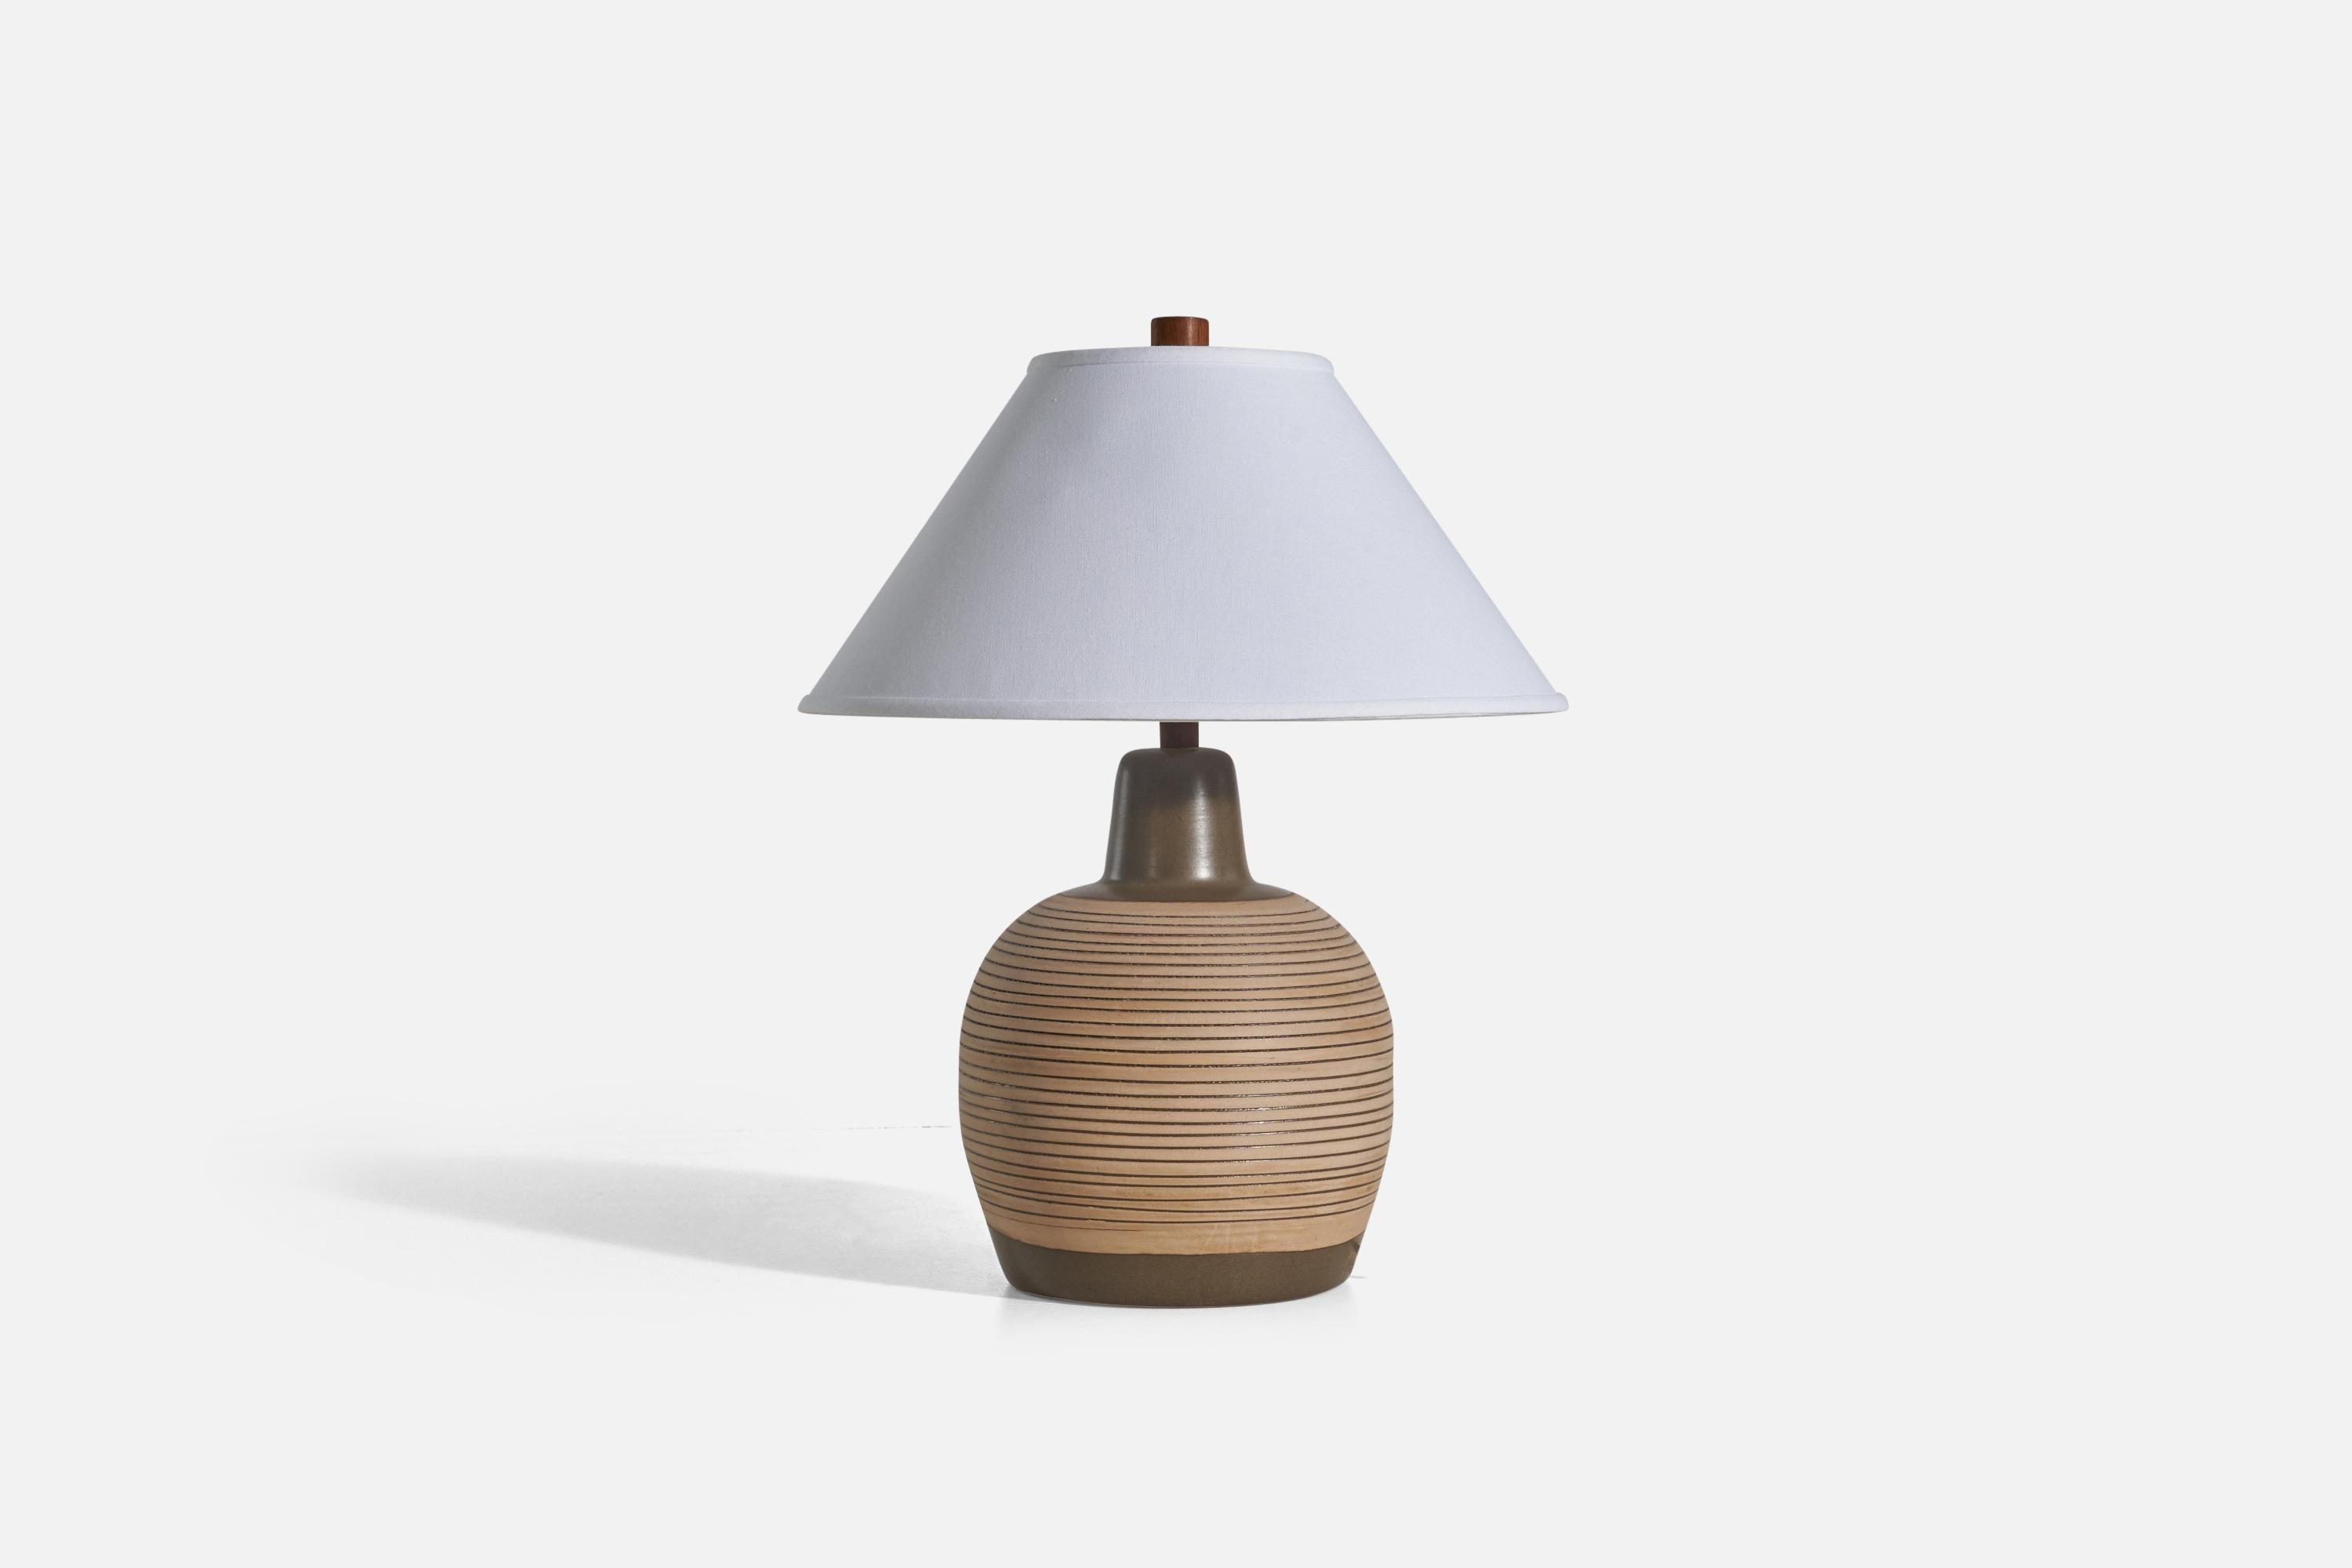 A brown and beige ceramic and walnut table lamp designed by Jane & Gordon Martz and produced by Marshall Studios, Indianapolis, 1950s.

Sold without Lampshade
Dimensions of Lamp (inches) : 15.56 x 9 x 9 (Height x Width x Depth)
Dimensions of